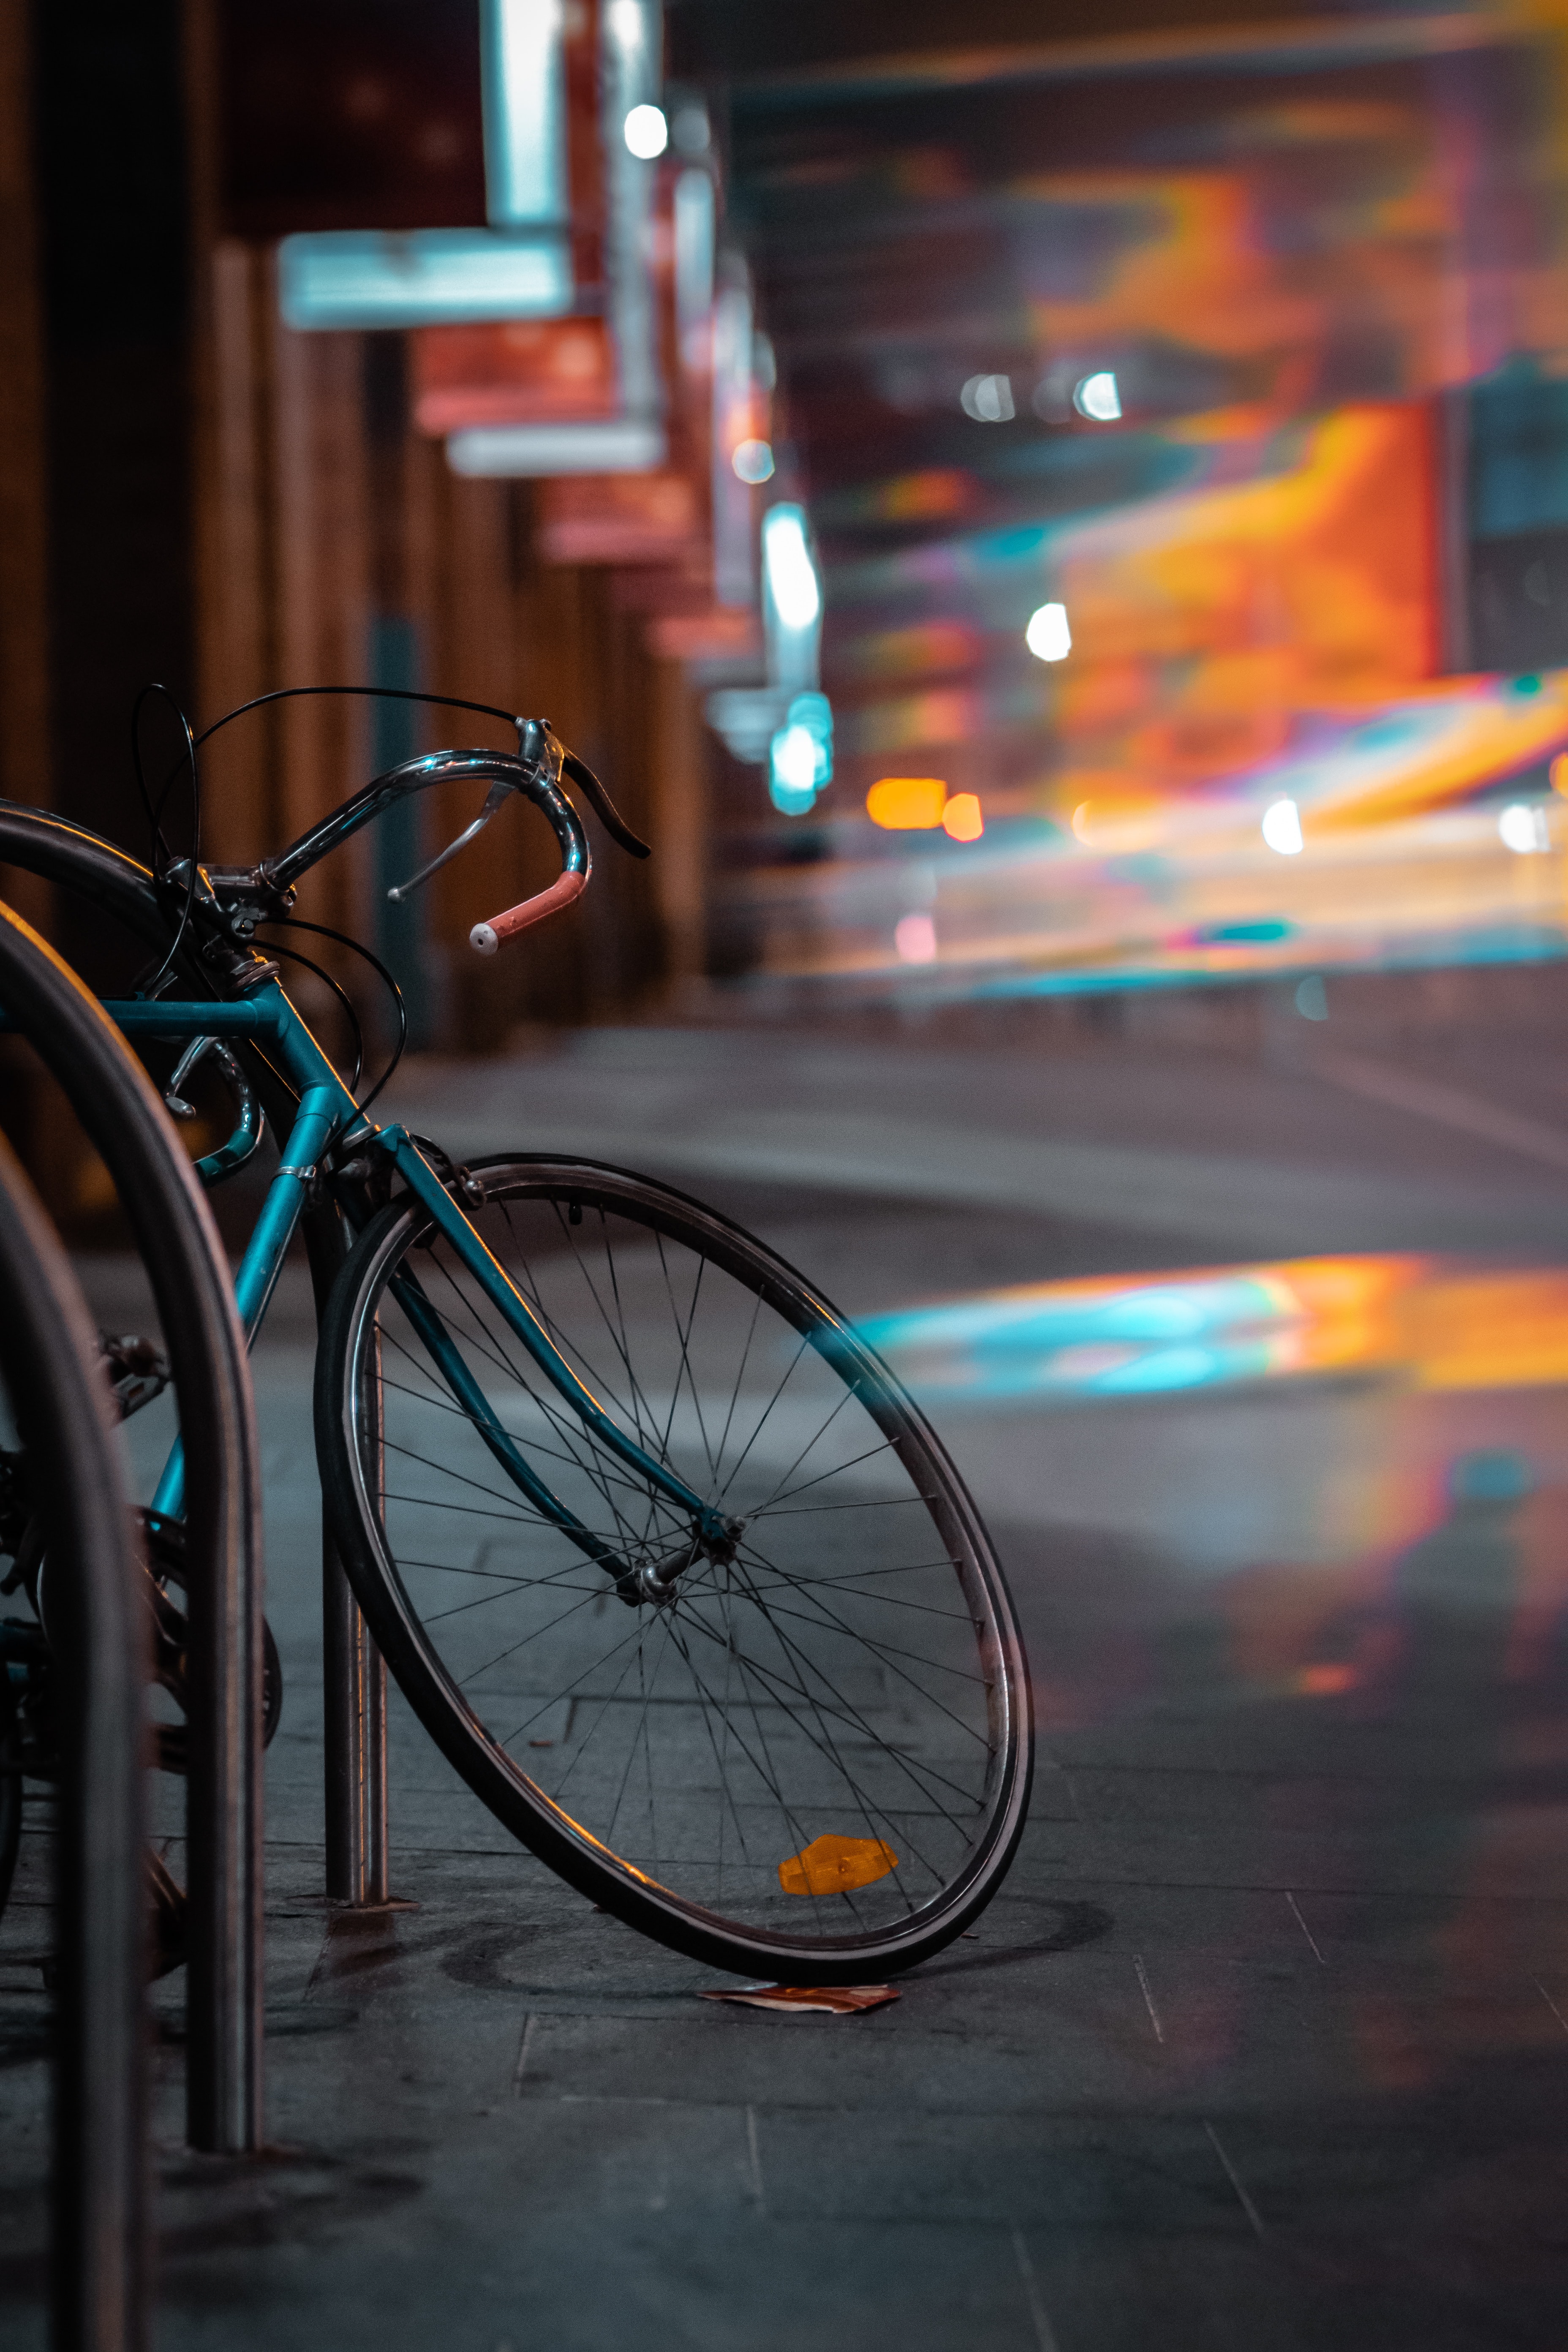 Free HD wheels, miscellaneous, smooth, blur, bicycle, miscellanea, glare, evening, transport